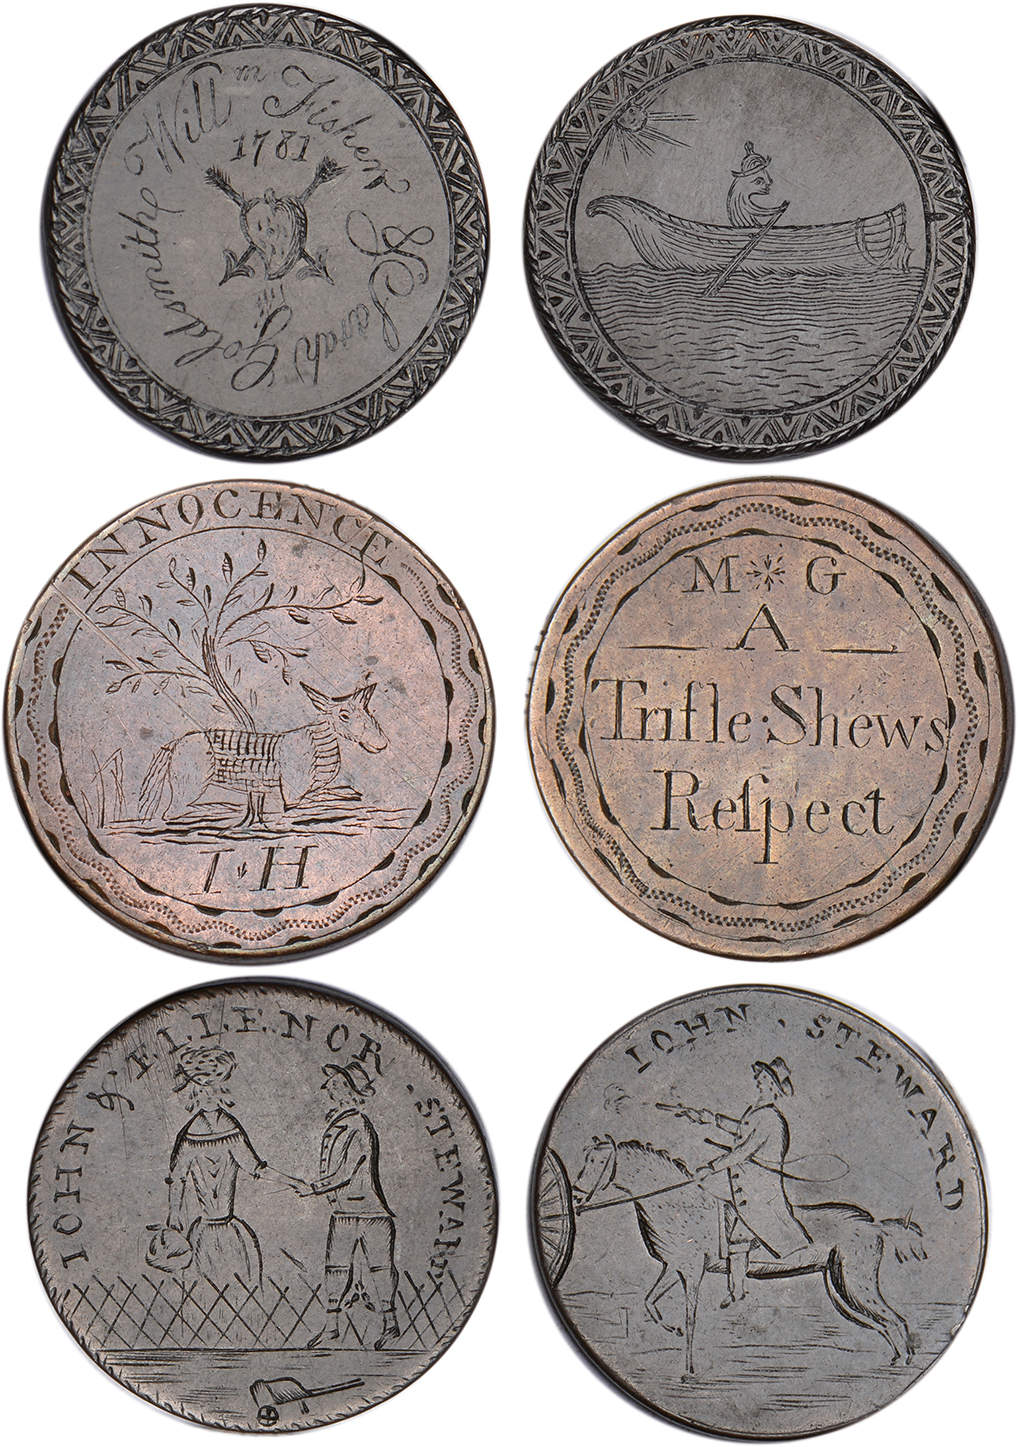 Couples, a Georgian halfpenny, smoothed and engraved both sides, JOHN & ELLENOR STEWARD, a couple,